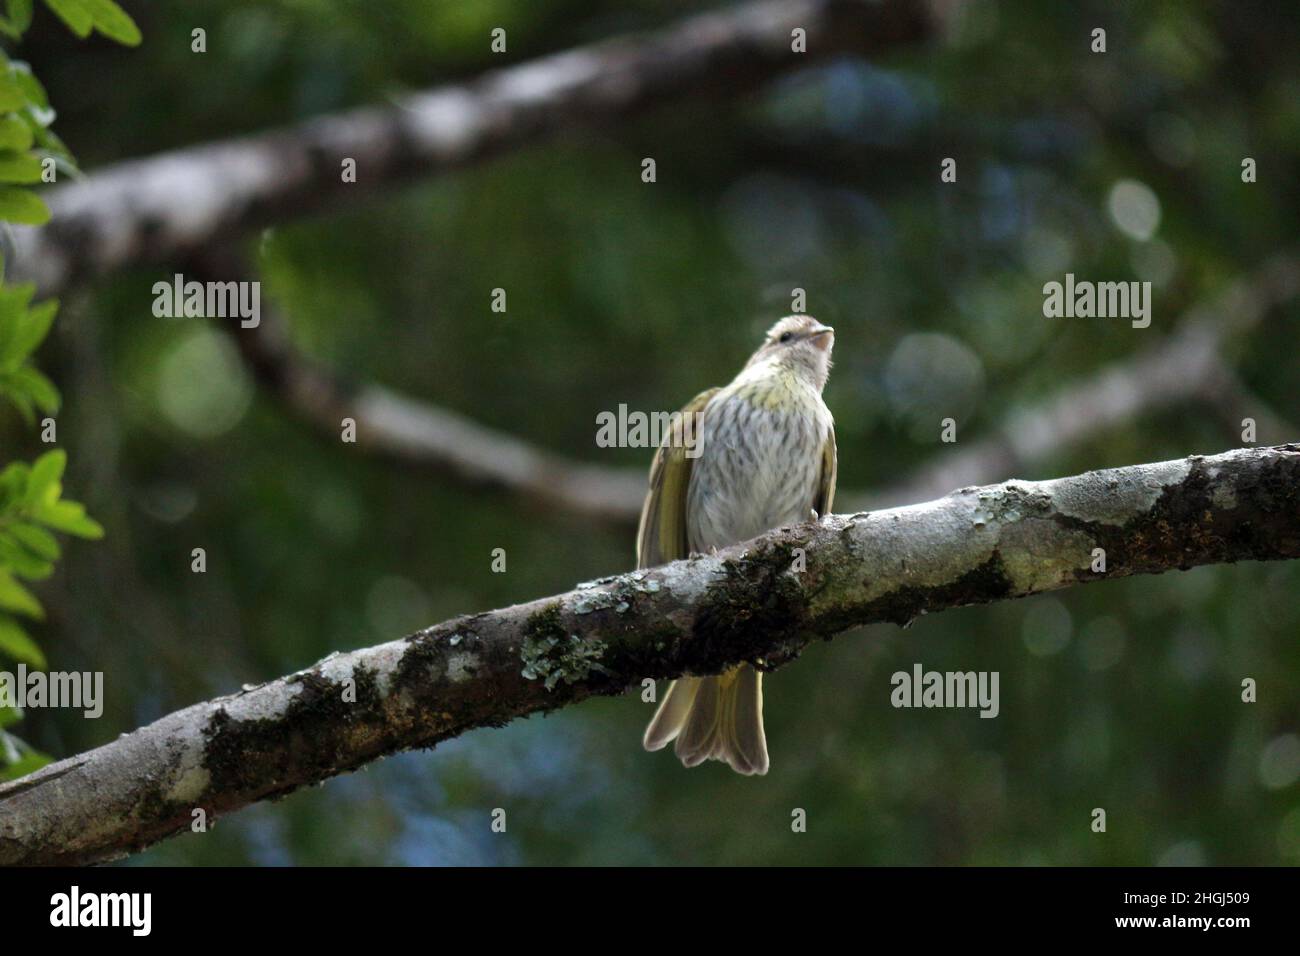 Small bird perched on tree branch. A break from your constant flights in nature. Stock Photo